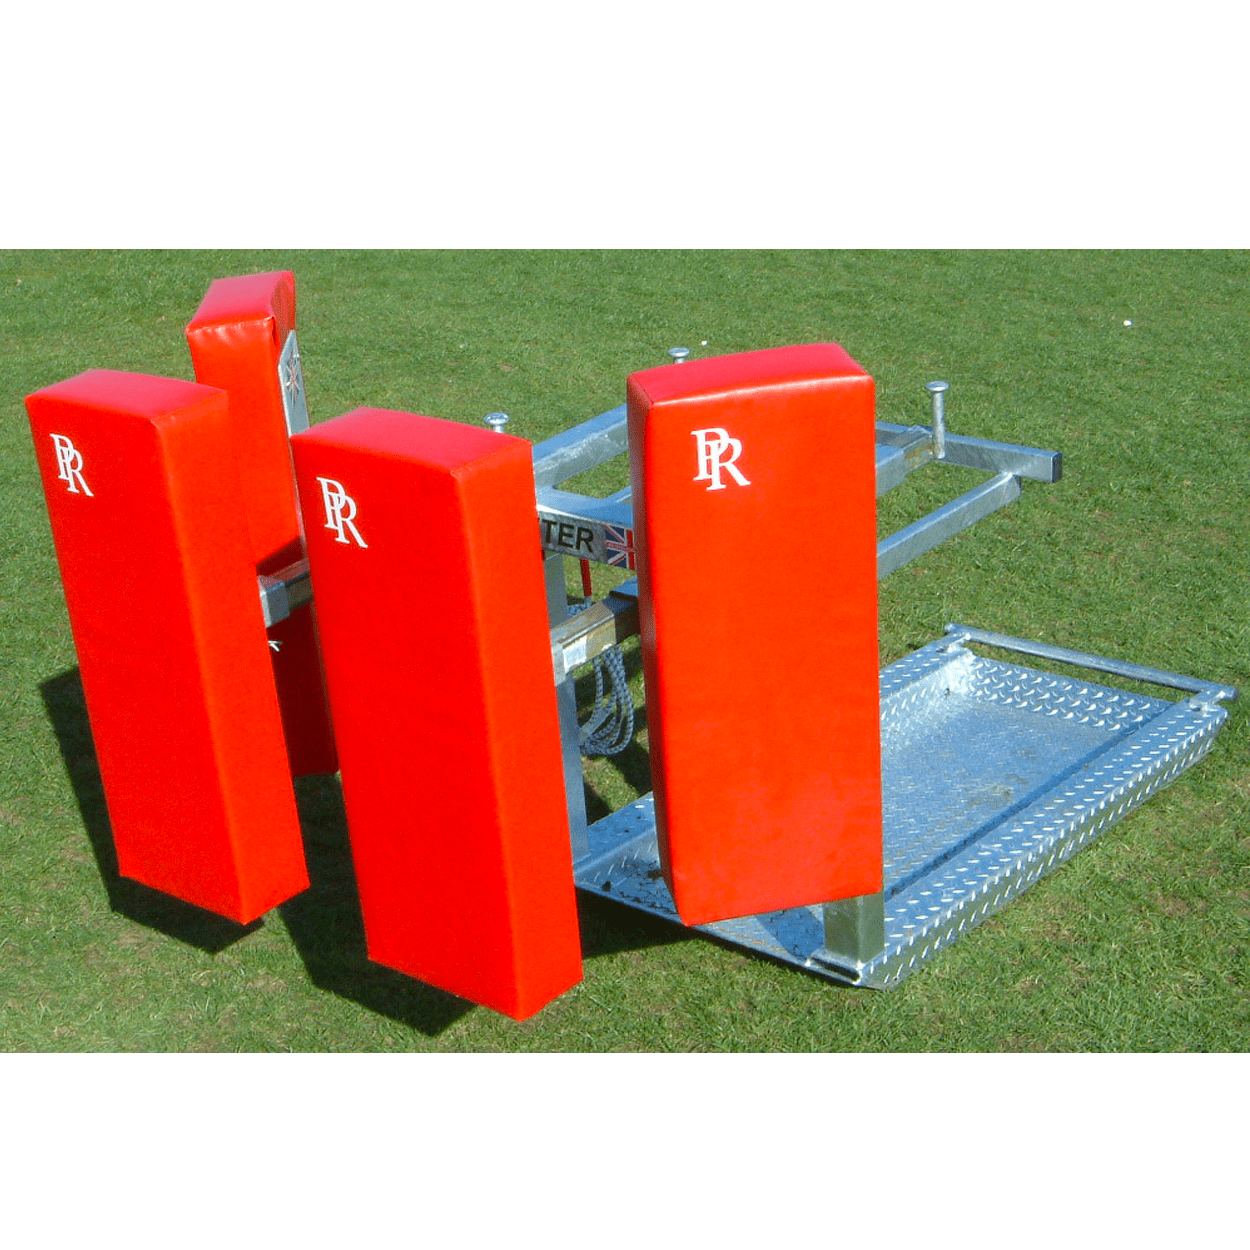 Richter Engineering Rugby Training Equipment RM2 - Two Reactive Pads Predator Ruckmaster Rugby Scrum Sled